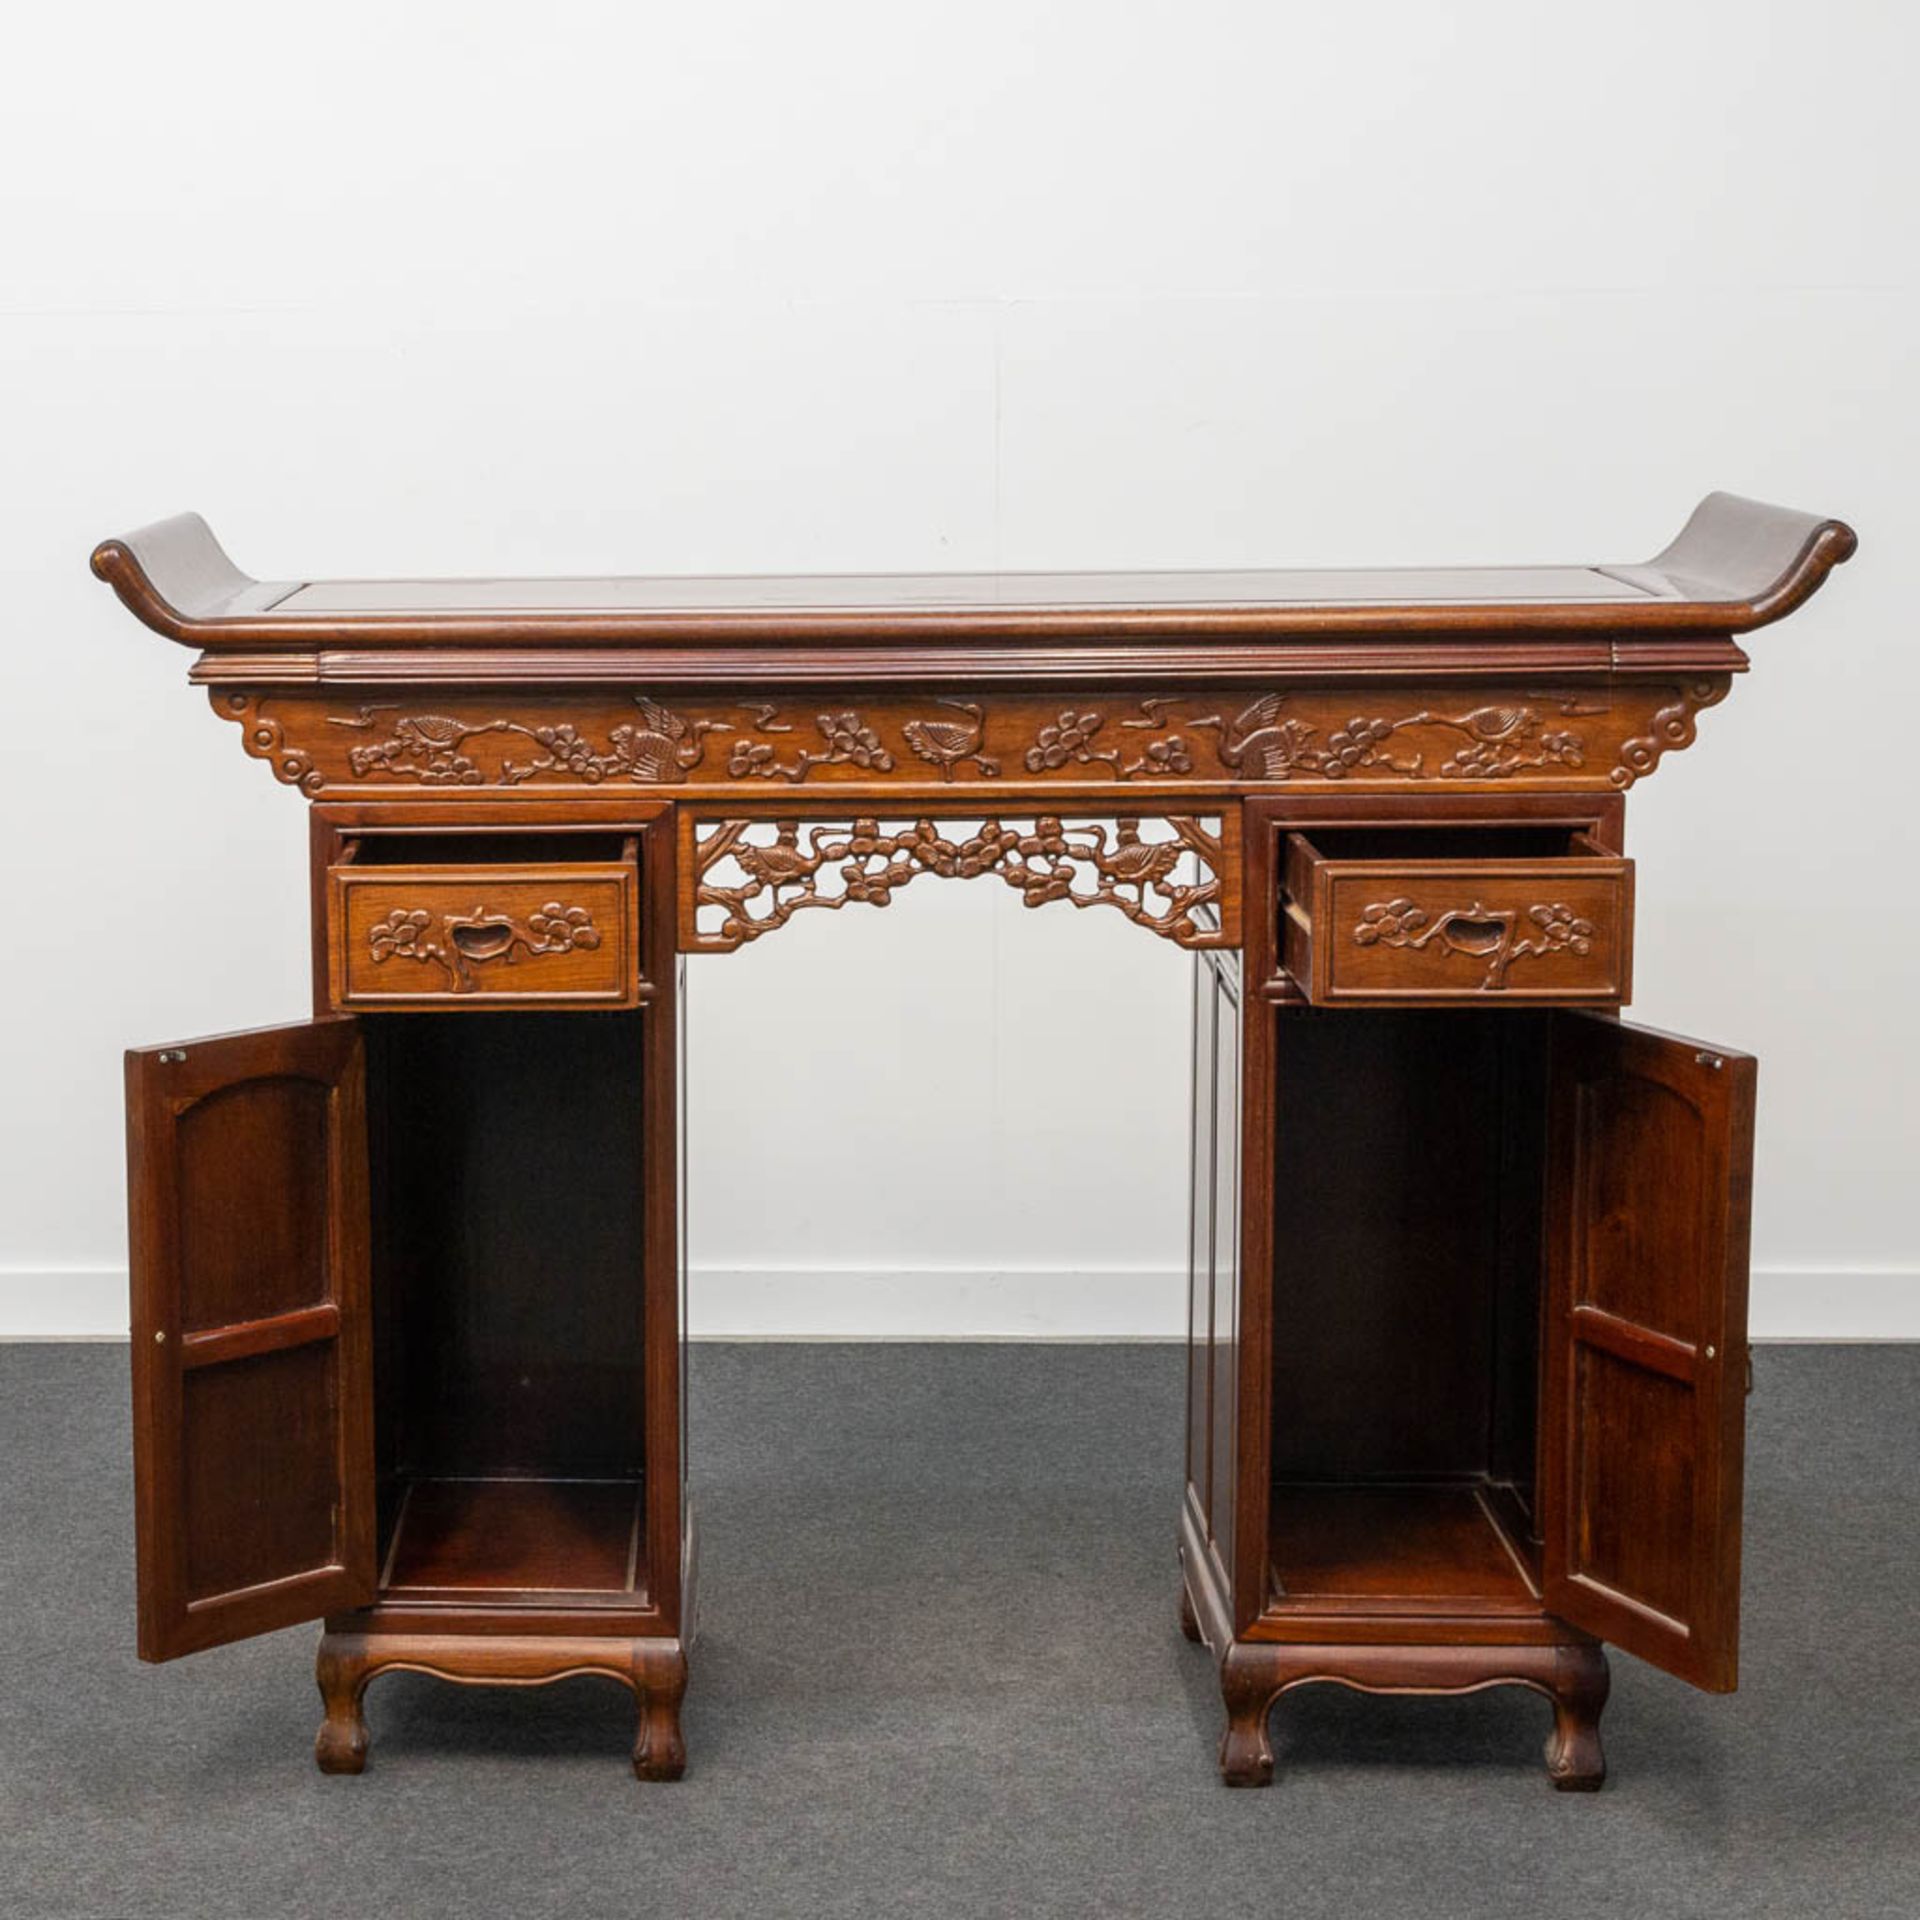 A Chinese hardwood Scroll Desk - Image 10 of 23